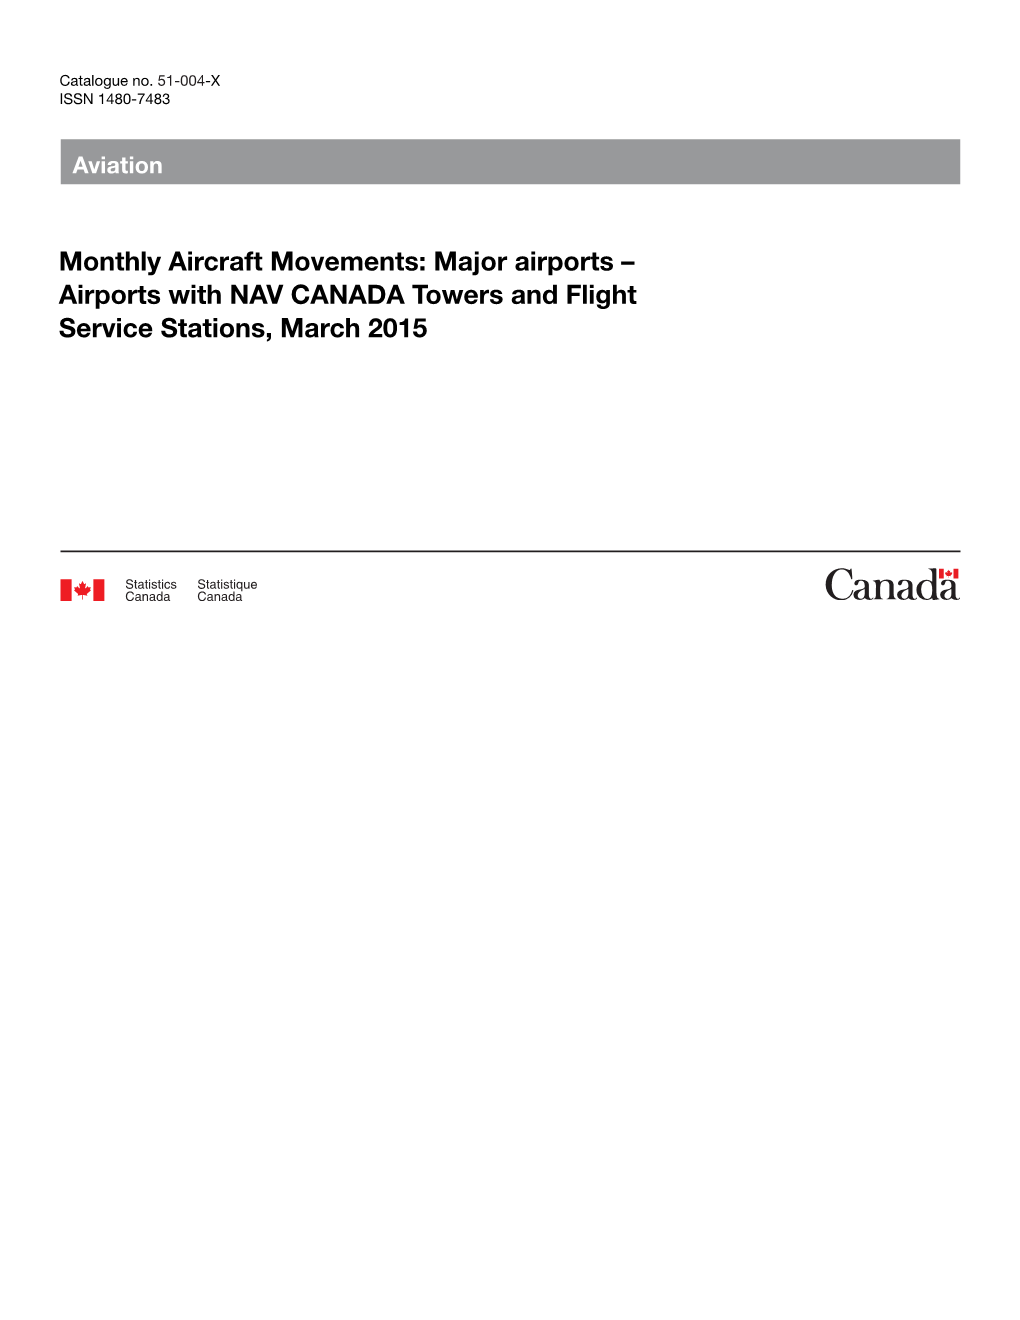 Monthly Aircraft Movements: Major Airports – Airports with NAV CANADA Towers and Flight Service Stations, March 2015